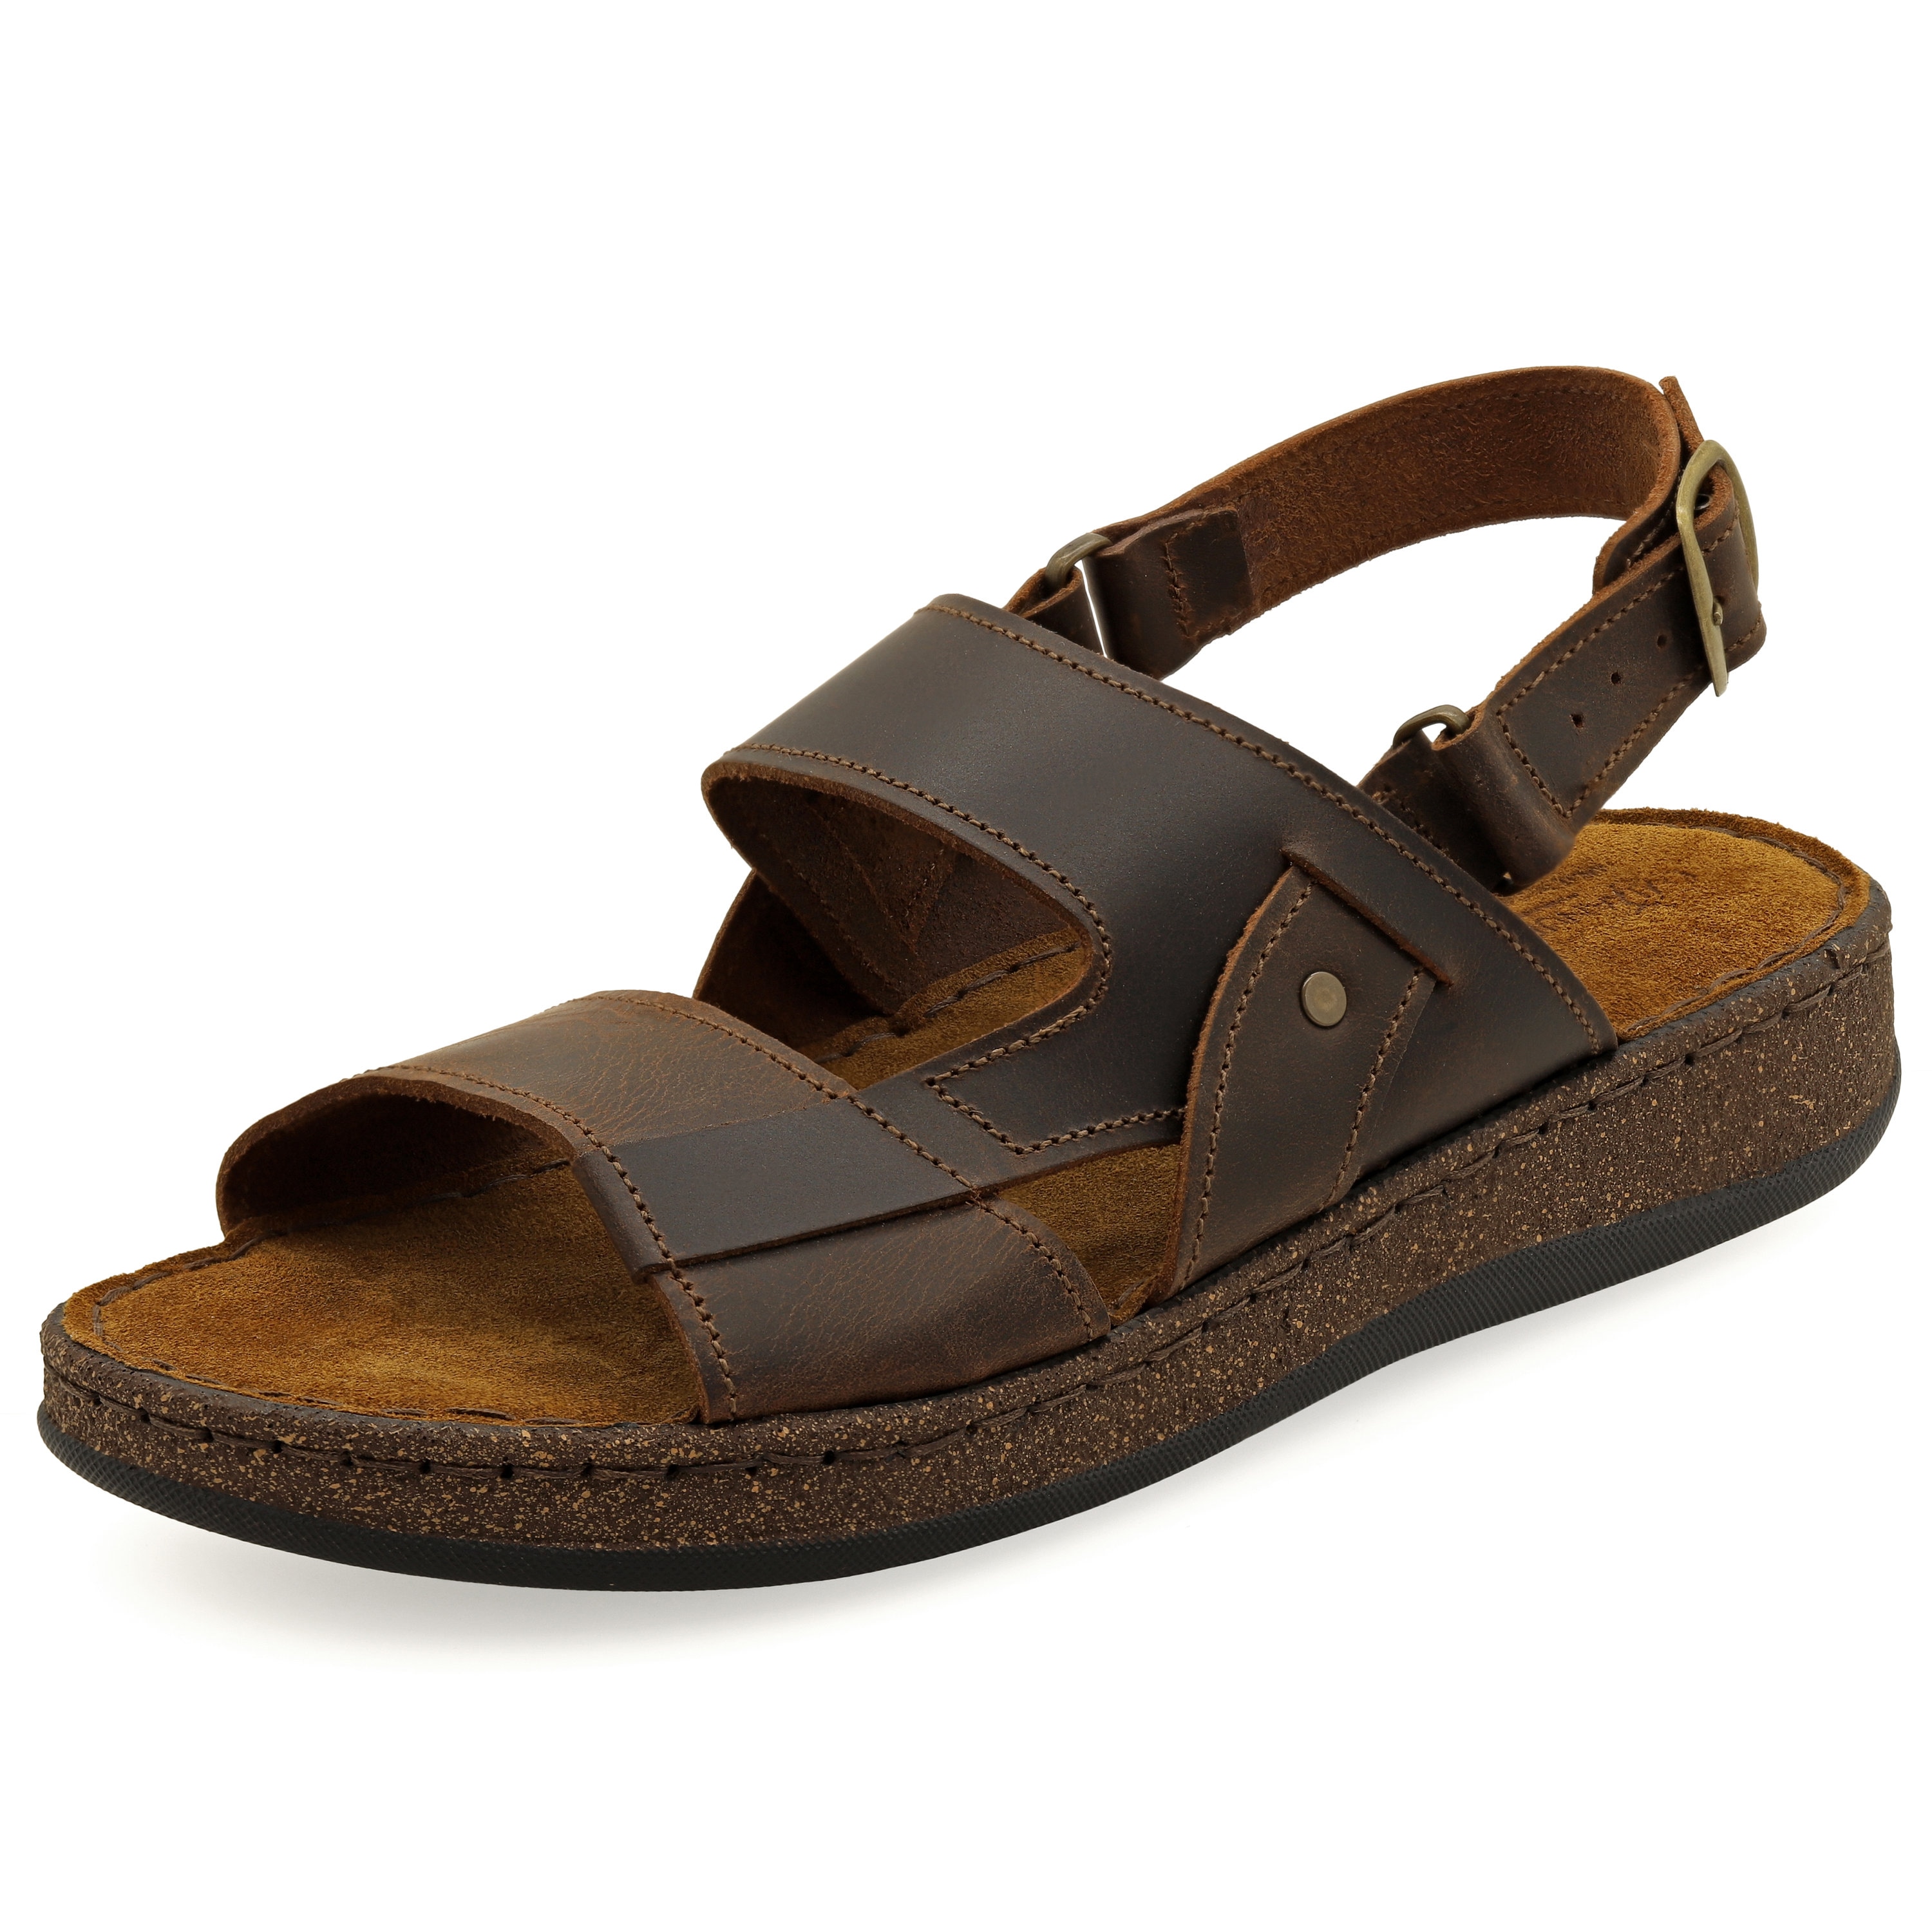 Greek Leather Fisherman Sandals for Men Cushioned Insole Men's